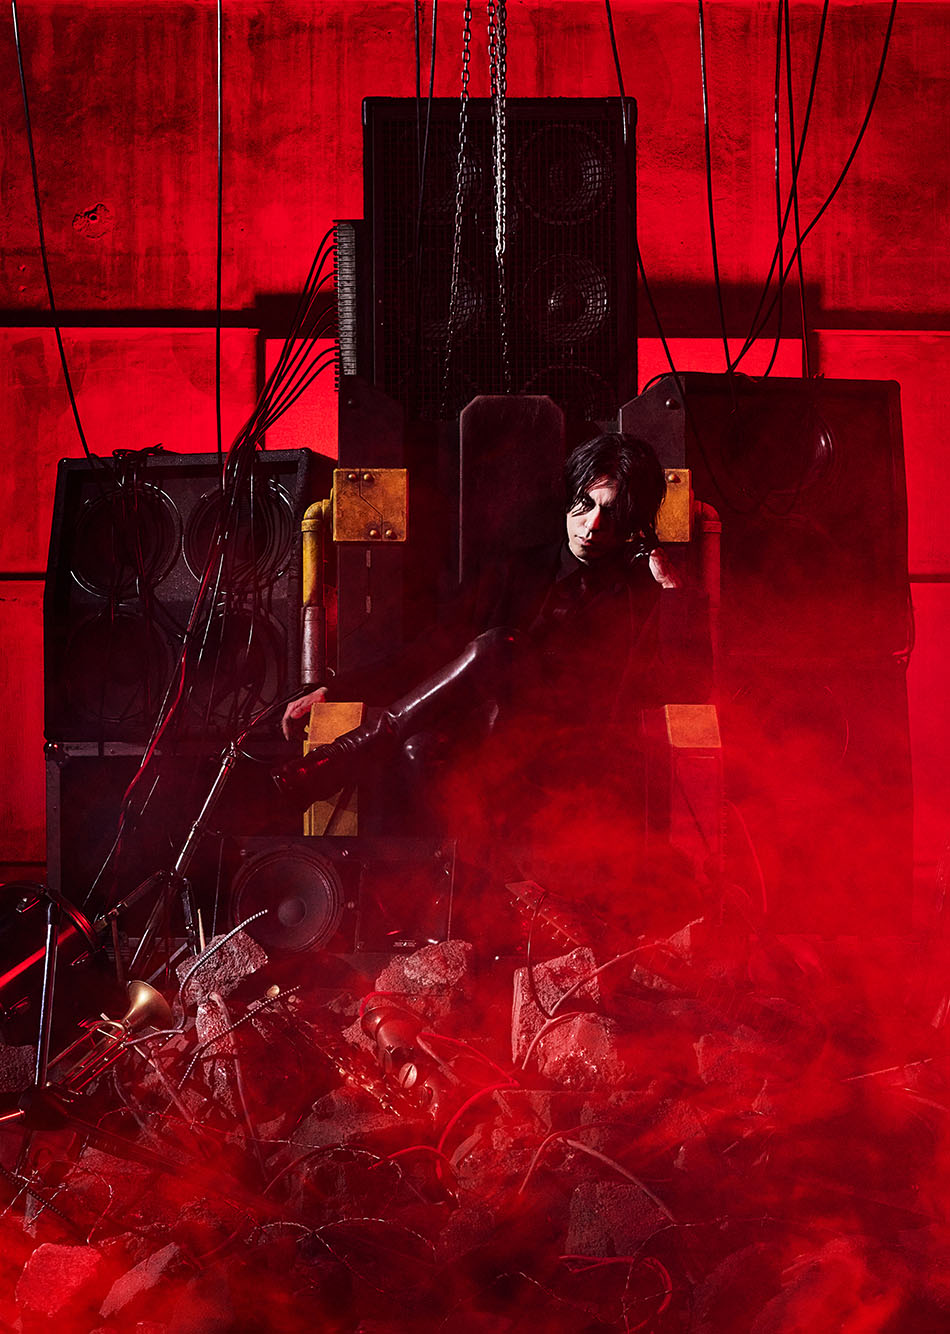 HAZUKI solo pic. He is sat on a throne of guitar amps.